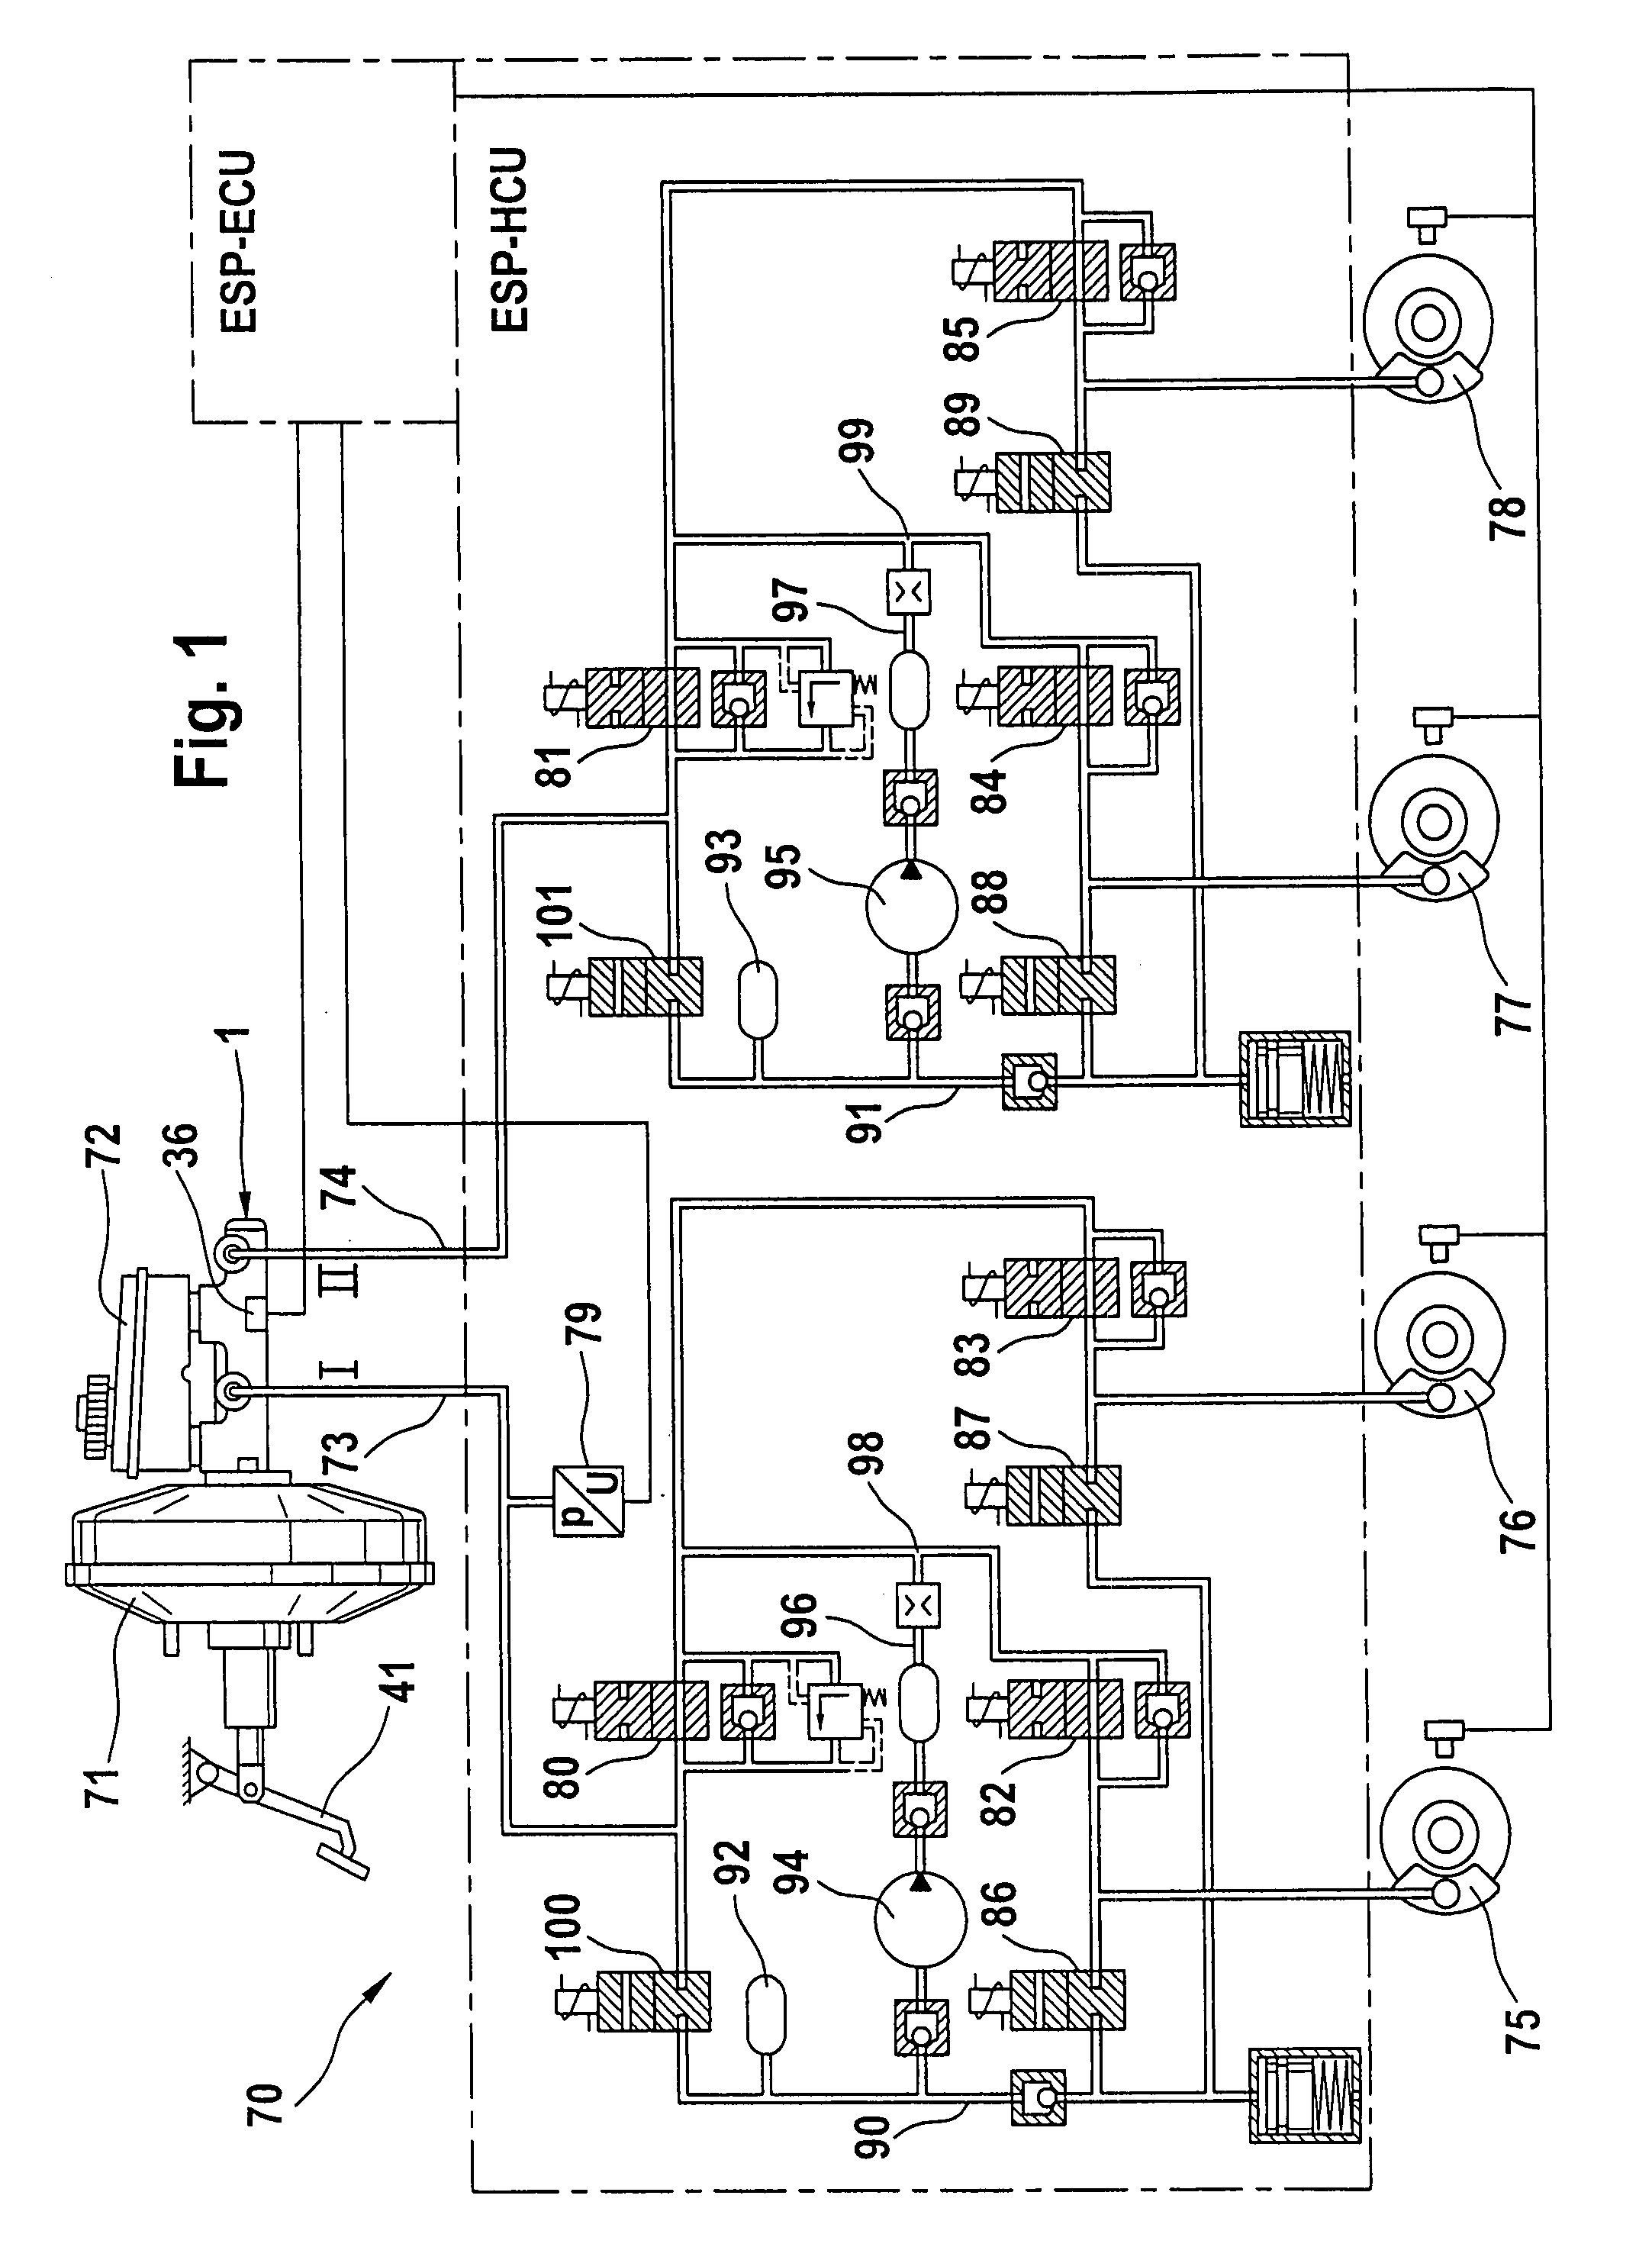 Electrohydraulic Braking System Comprising Vehicle Dynamics Control